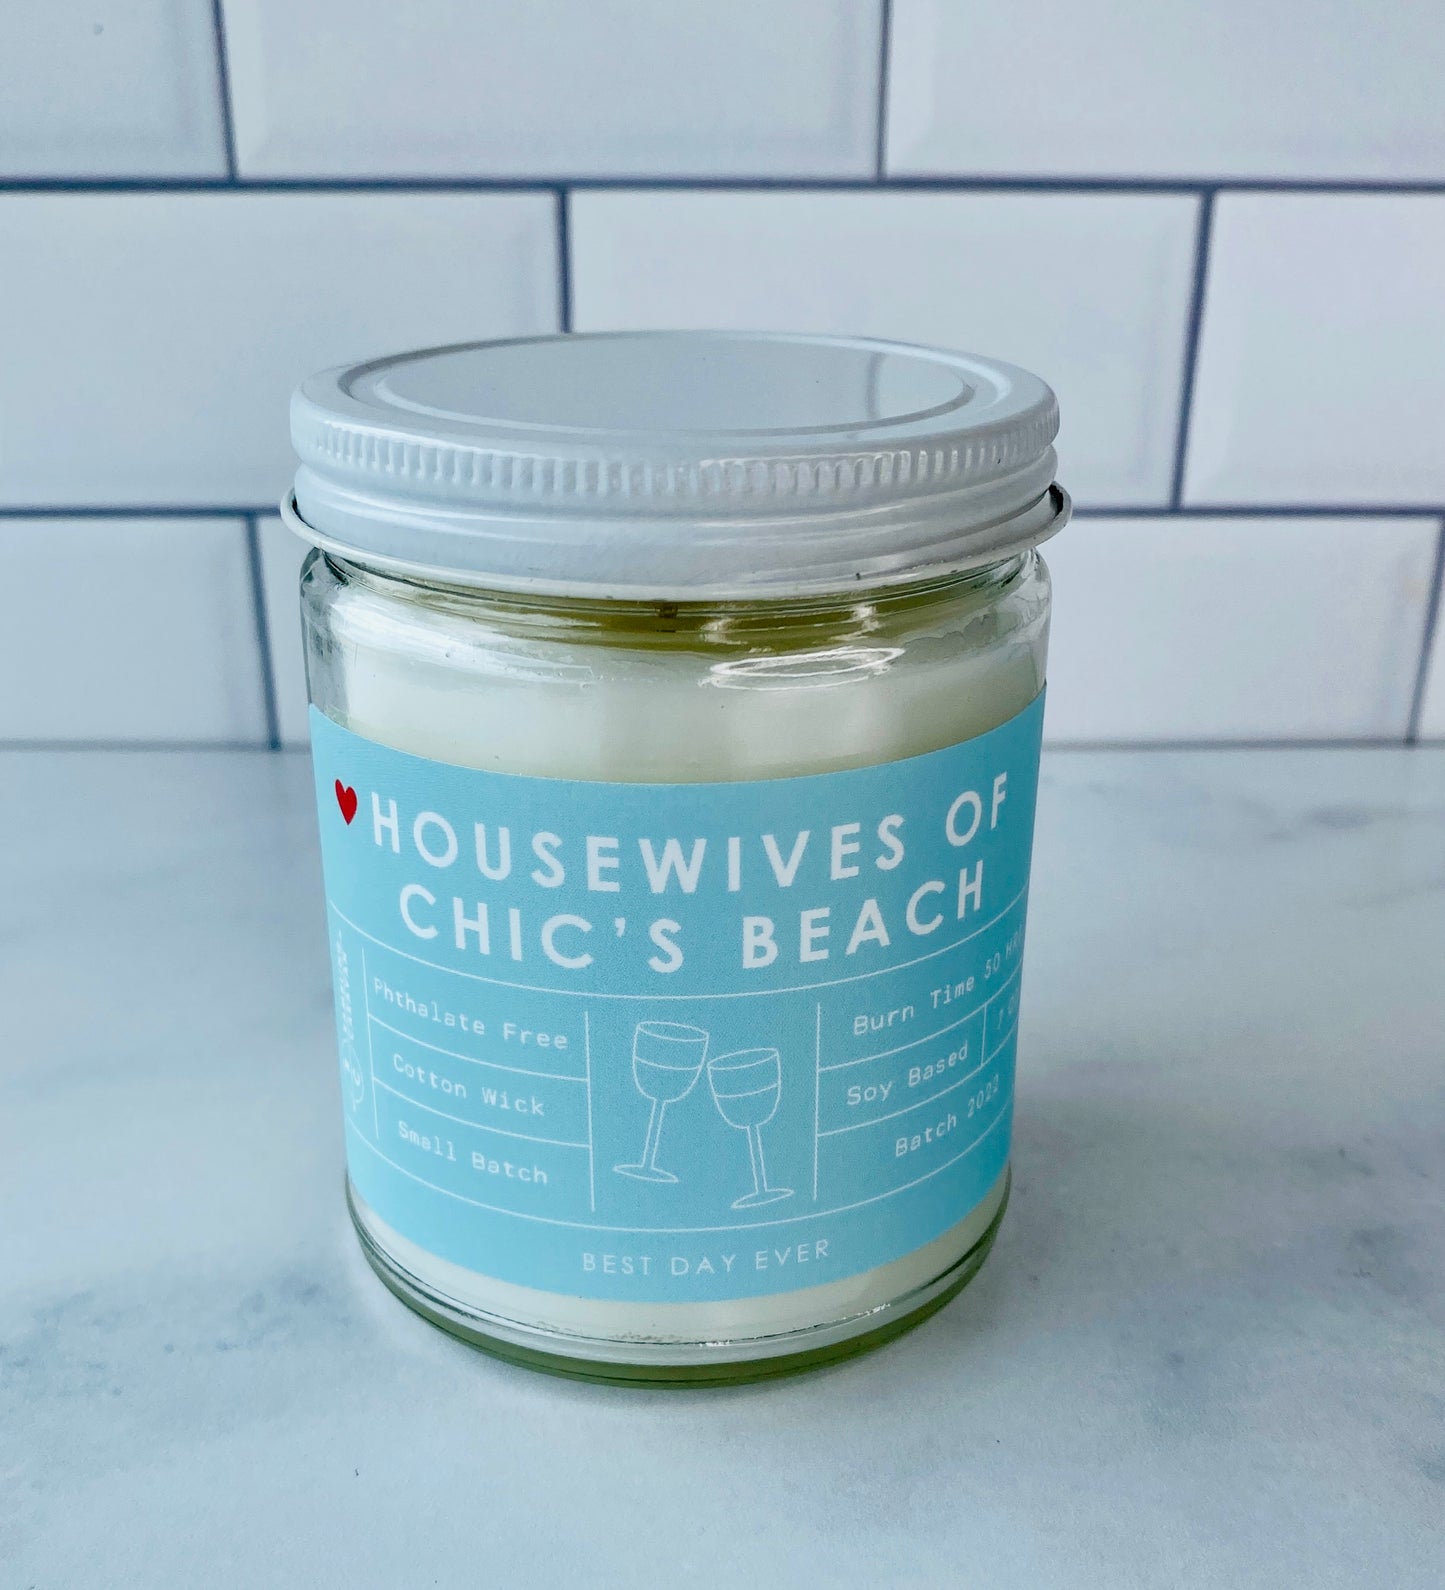 Housewives of Chic's Beach Candle